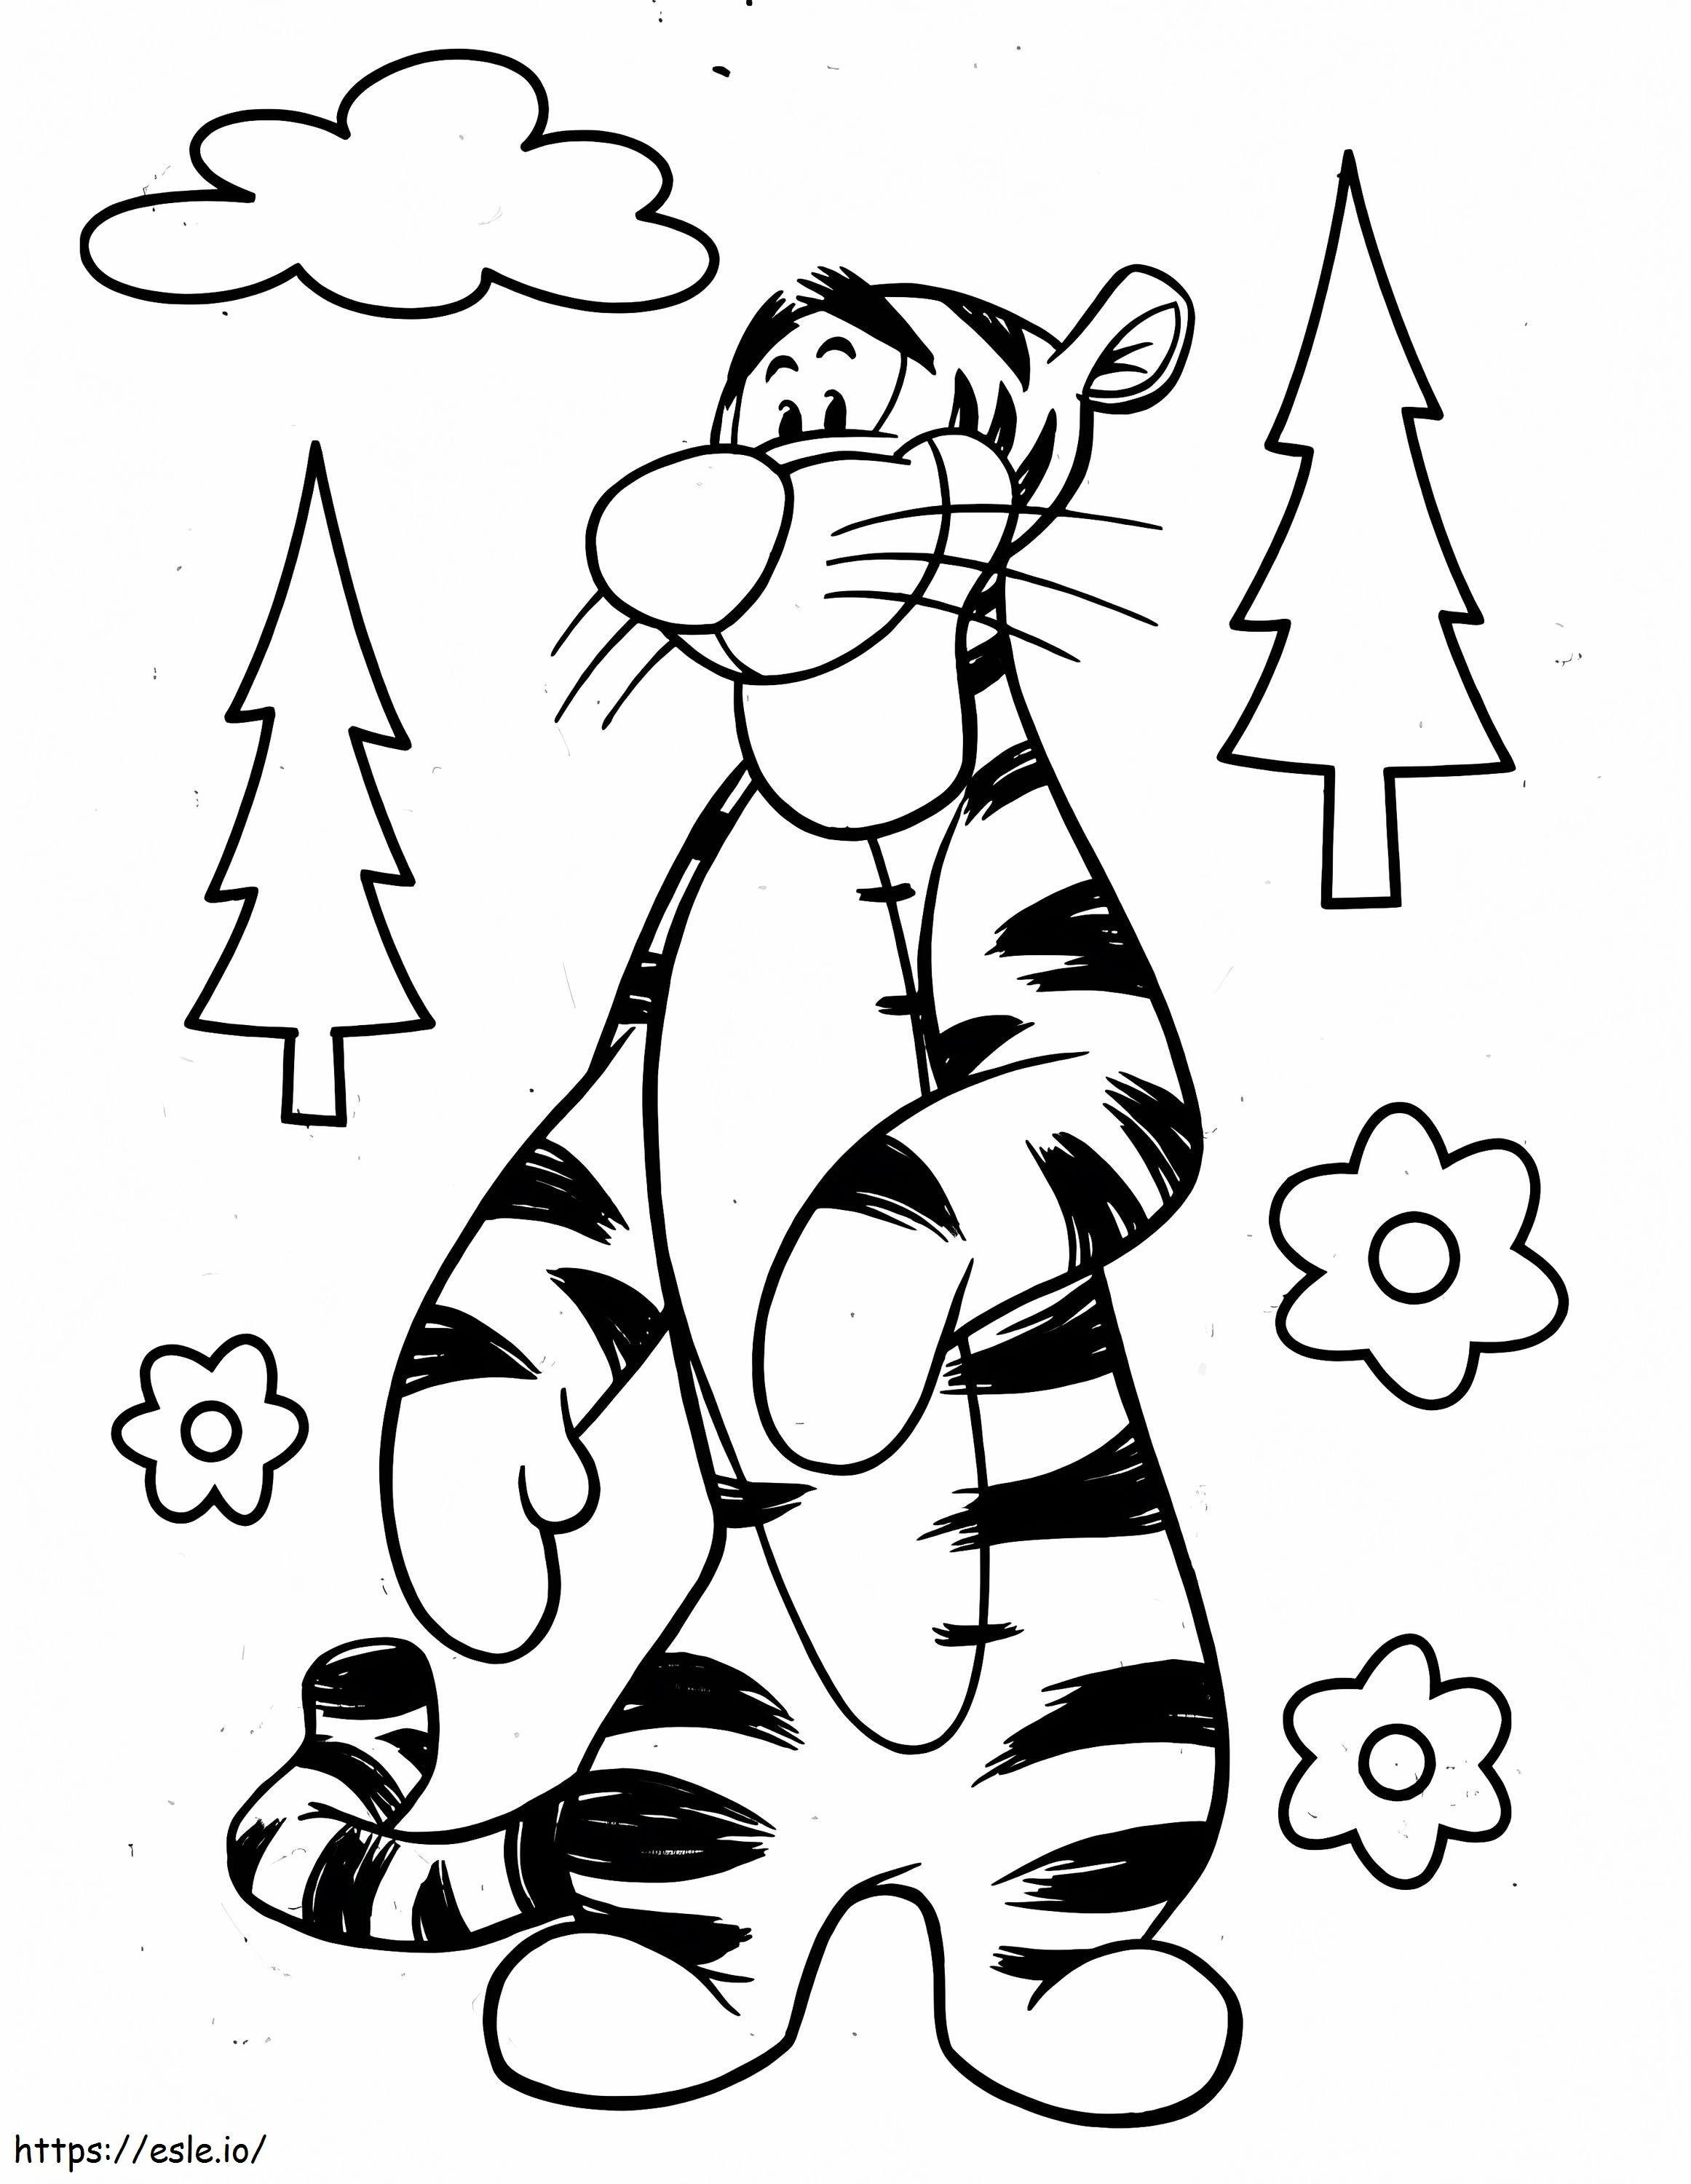 Tigger In The Wood coloring page